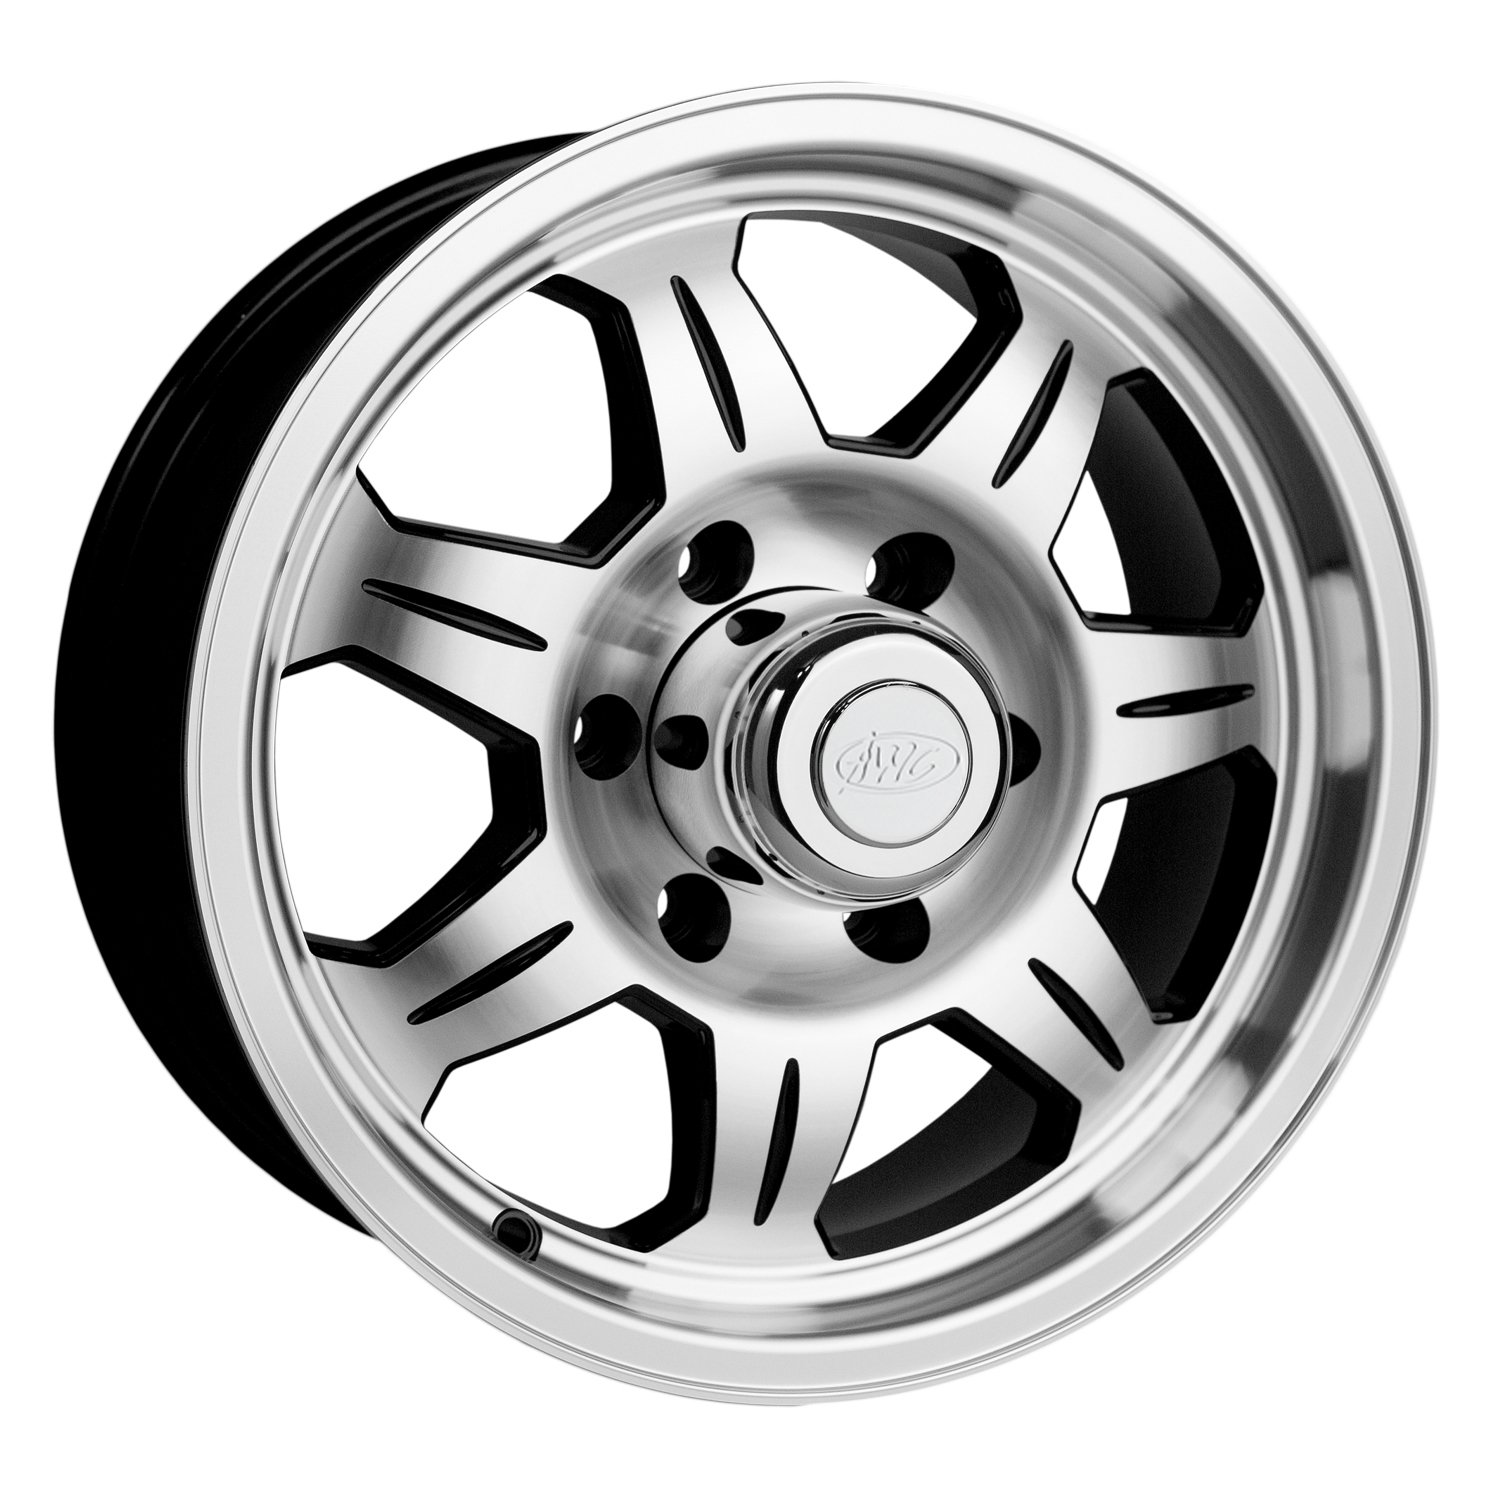 870 ELEMENT Trailer Wheel Size: 14 X 6" Bolt Pattern: 5 x 4.50" (114.30 mm) [Machined with Black Accents]